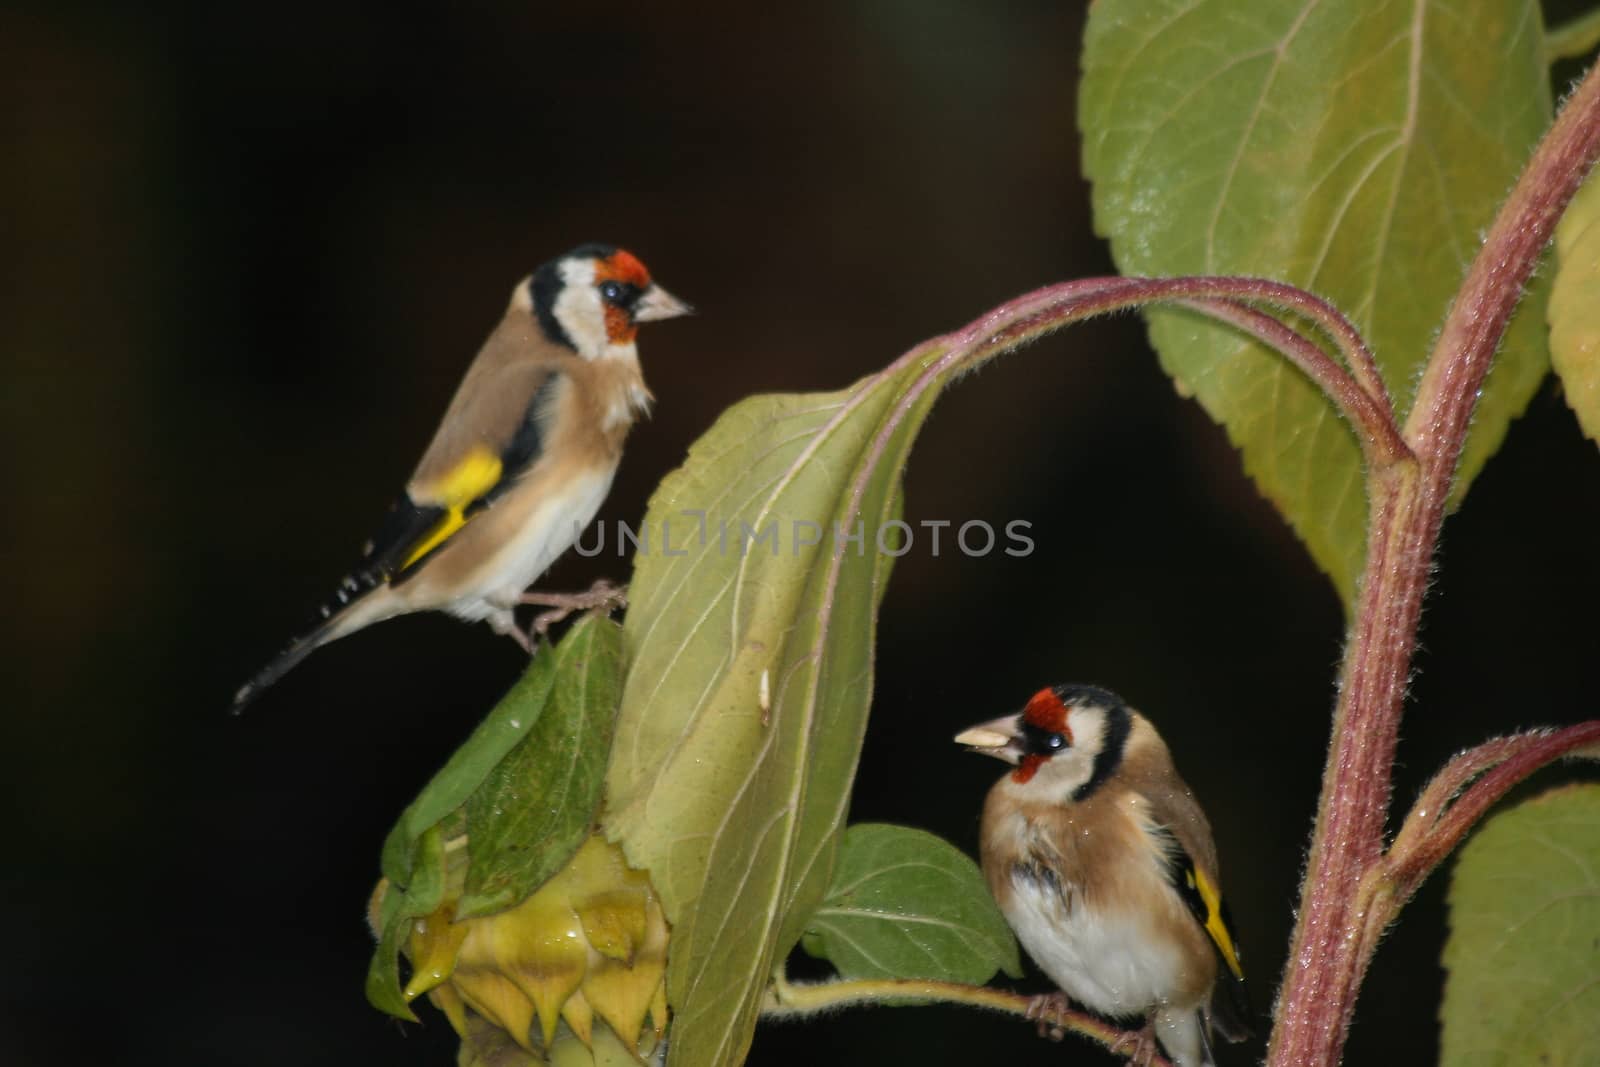 Goldfinch (Carduelis carduelis) by hadot